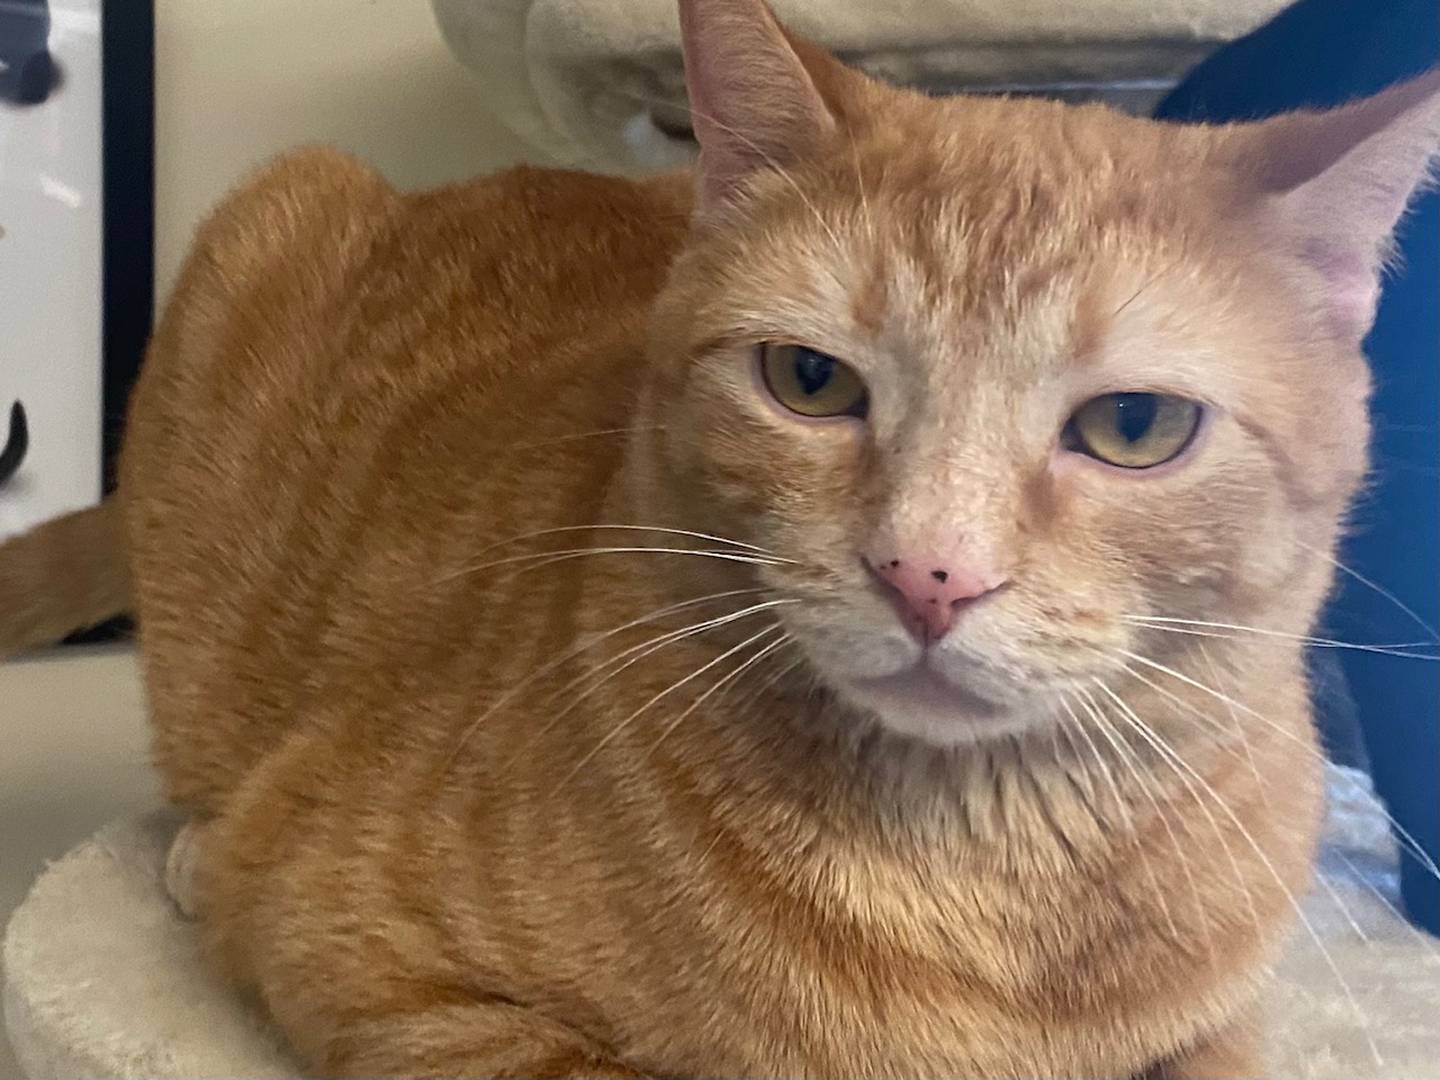 Billy is a 3-year-old domestic shorthair. He is very outgoing and playful. He has been front declawed and would do best in a single-family home. To meet Billy, visit justanimals.org or call 815-448-2510.